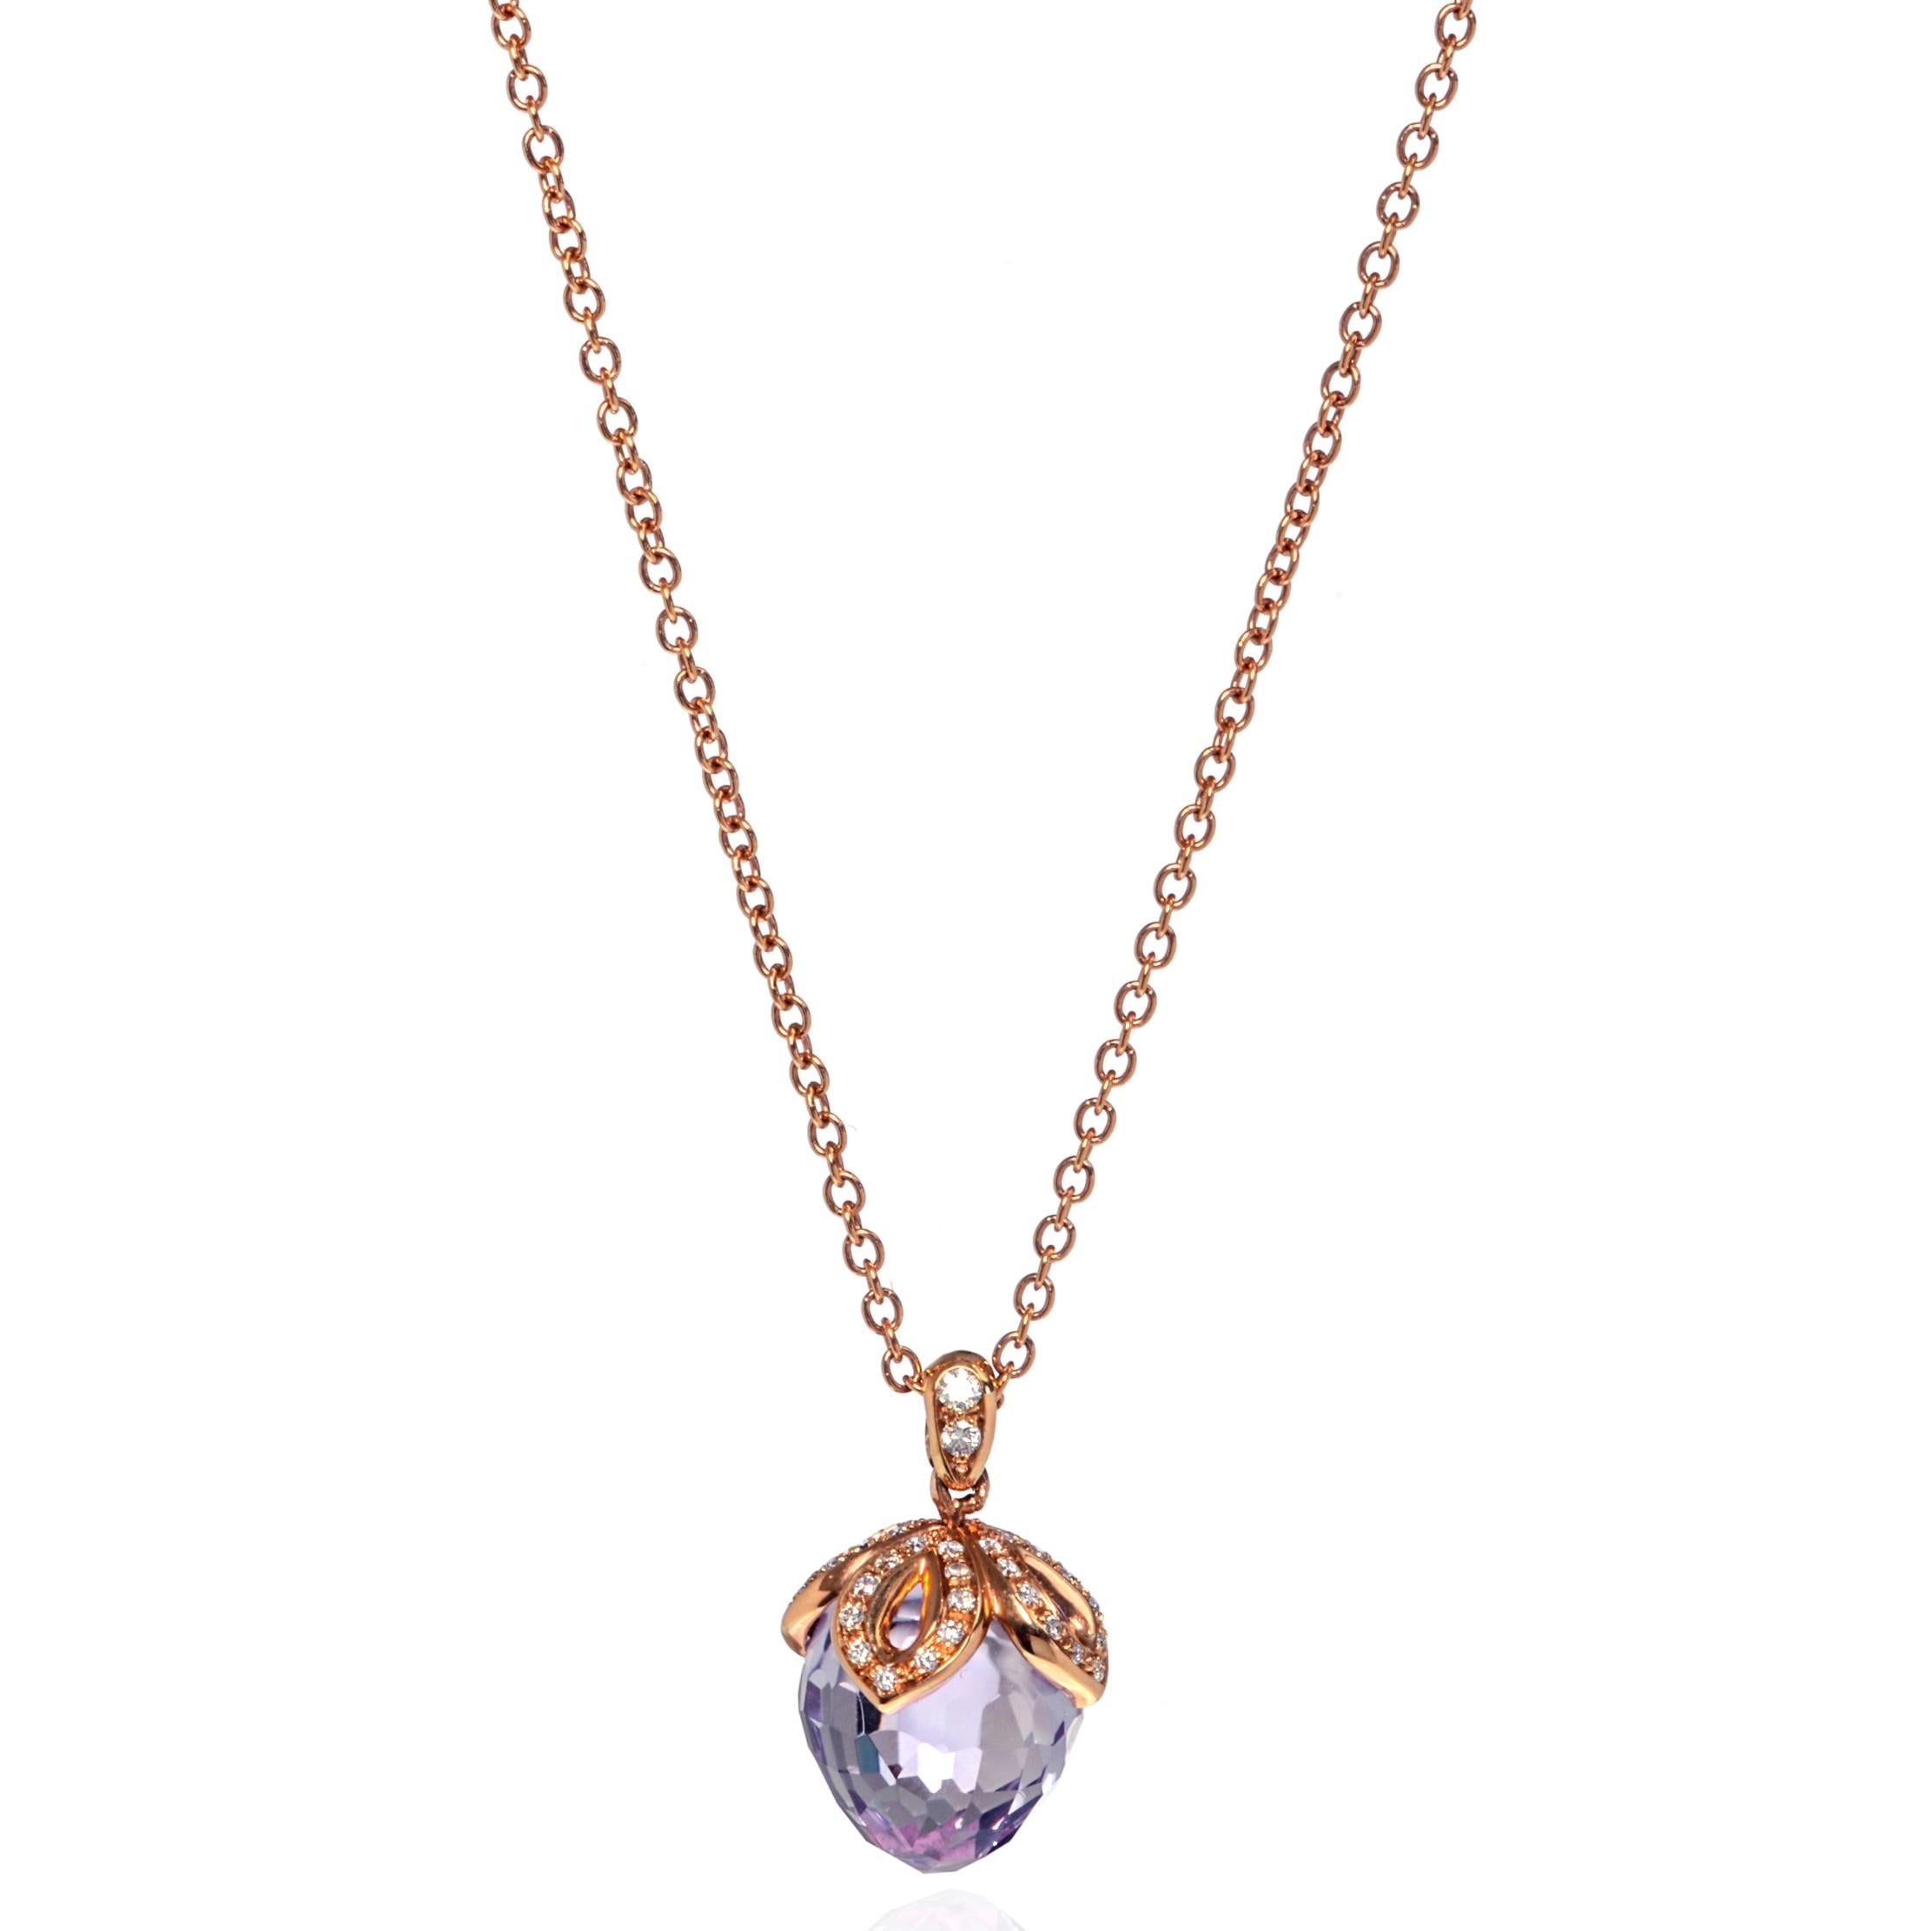 This beautiful purple Amethyst & diamond pendant necklace is crafted in 18k rose gold. The setting is set with tiny round cut diamonds that are 0.21cttw. Amethyst weight: 8.55cts. Pendant size: 16.00mm. Chain length: 16.5 inches. Comes with box and